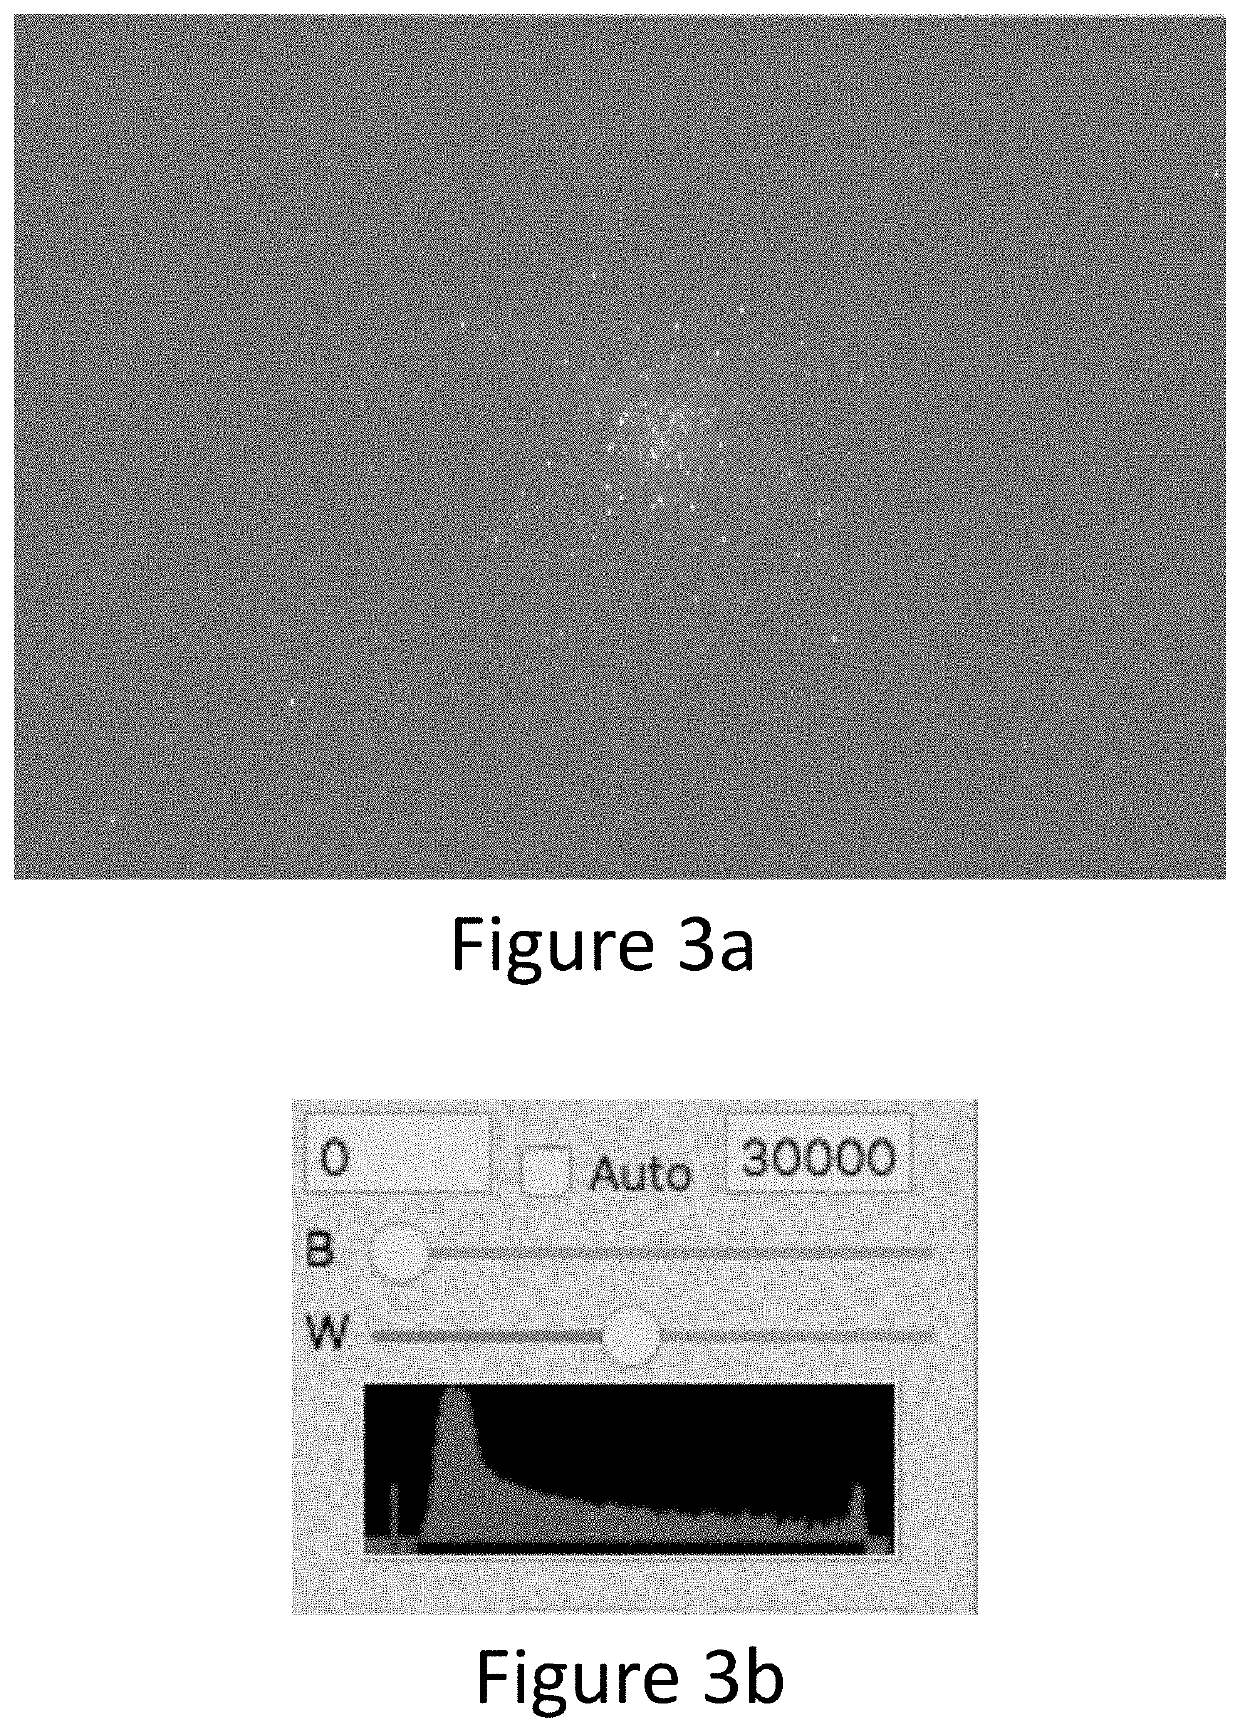 Method to obtain data cubes of low intensity intrinsic spectral images when imaging under high illumination conditions without the use of filters